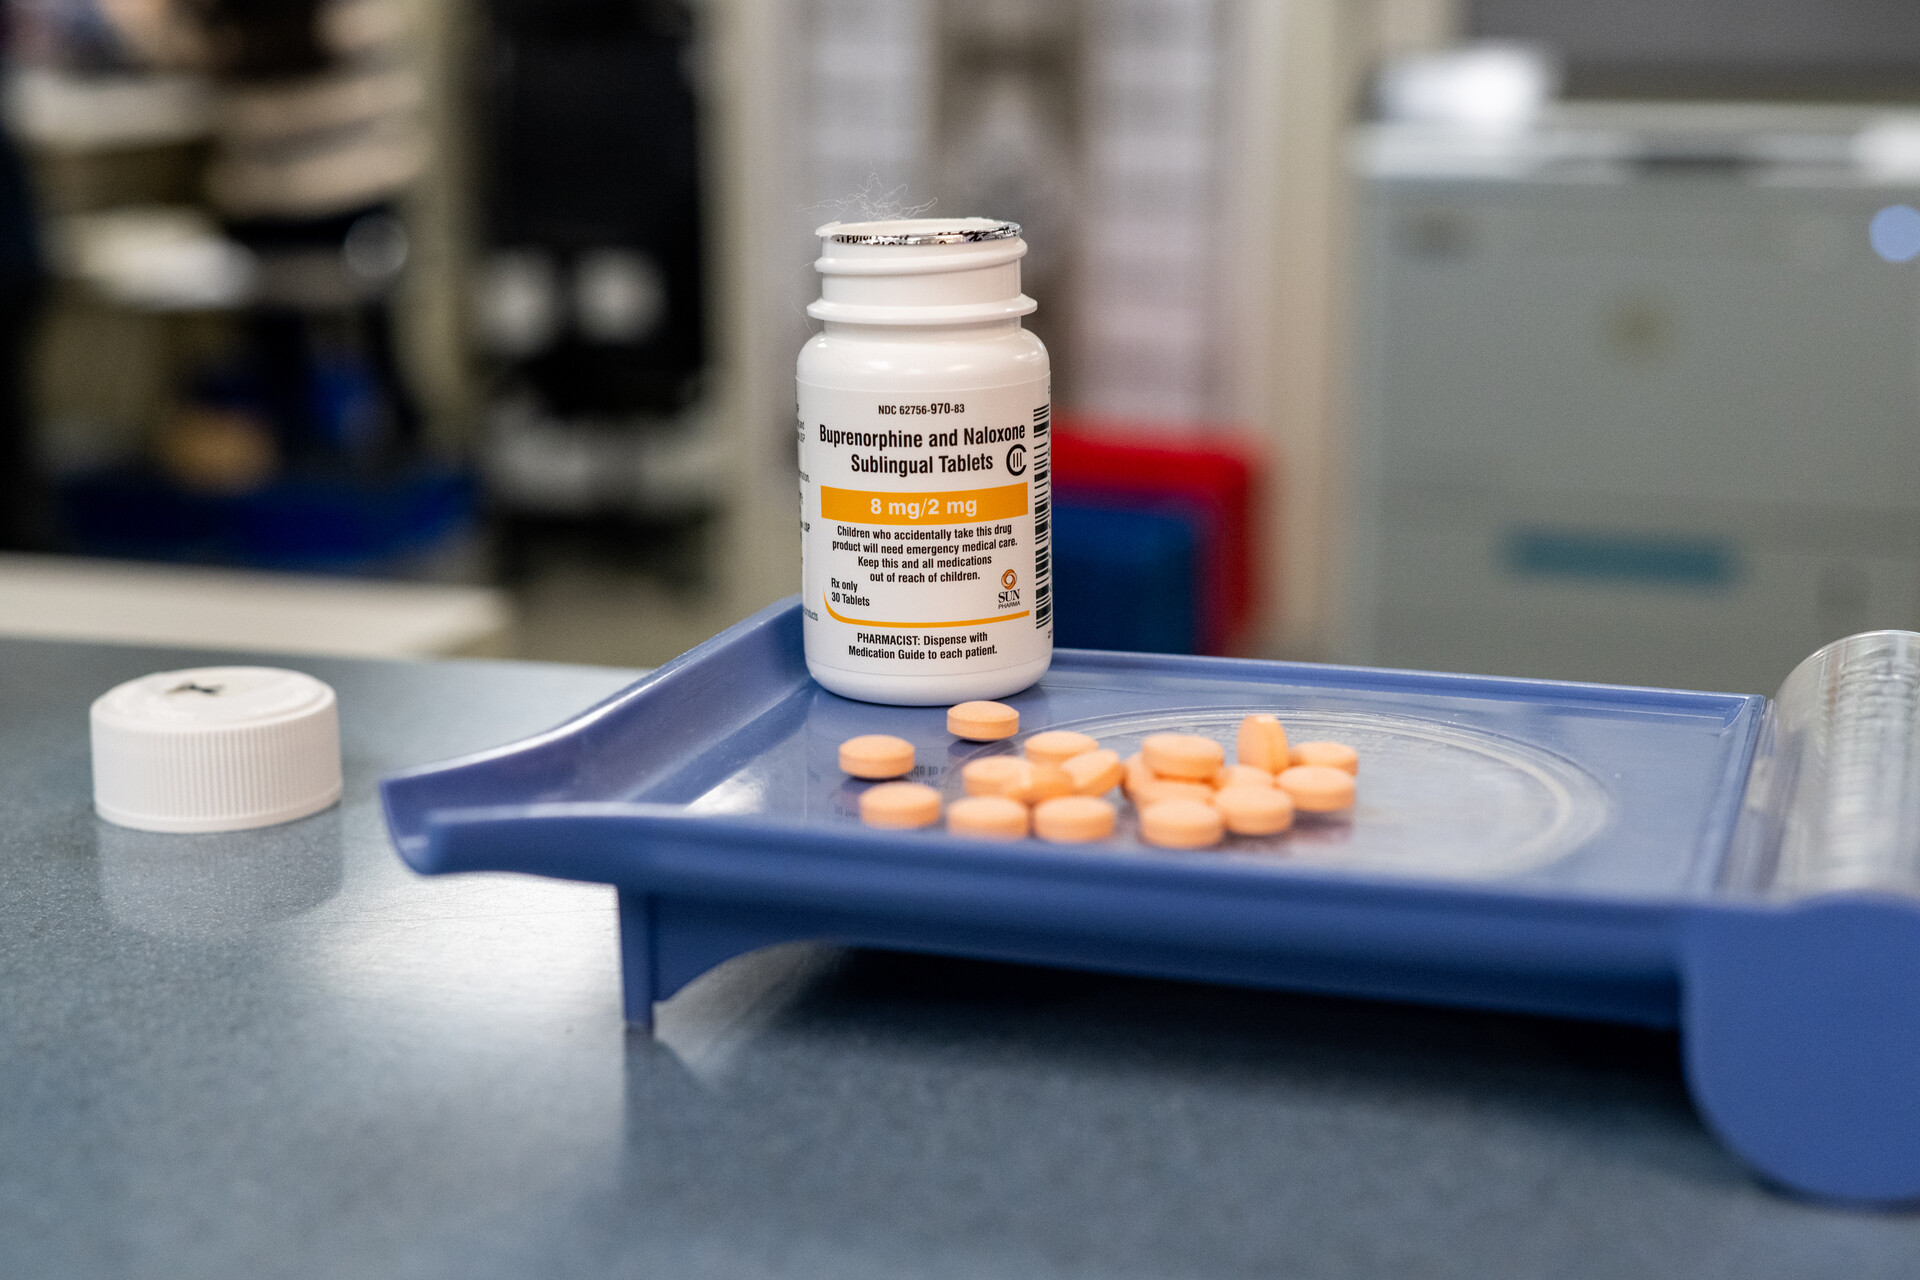 Buprenorphine and Naloxone orange tablets are measured on a blue surface inside a medical clinic. The bottle is white with black and orange letters.